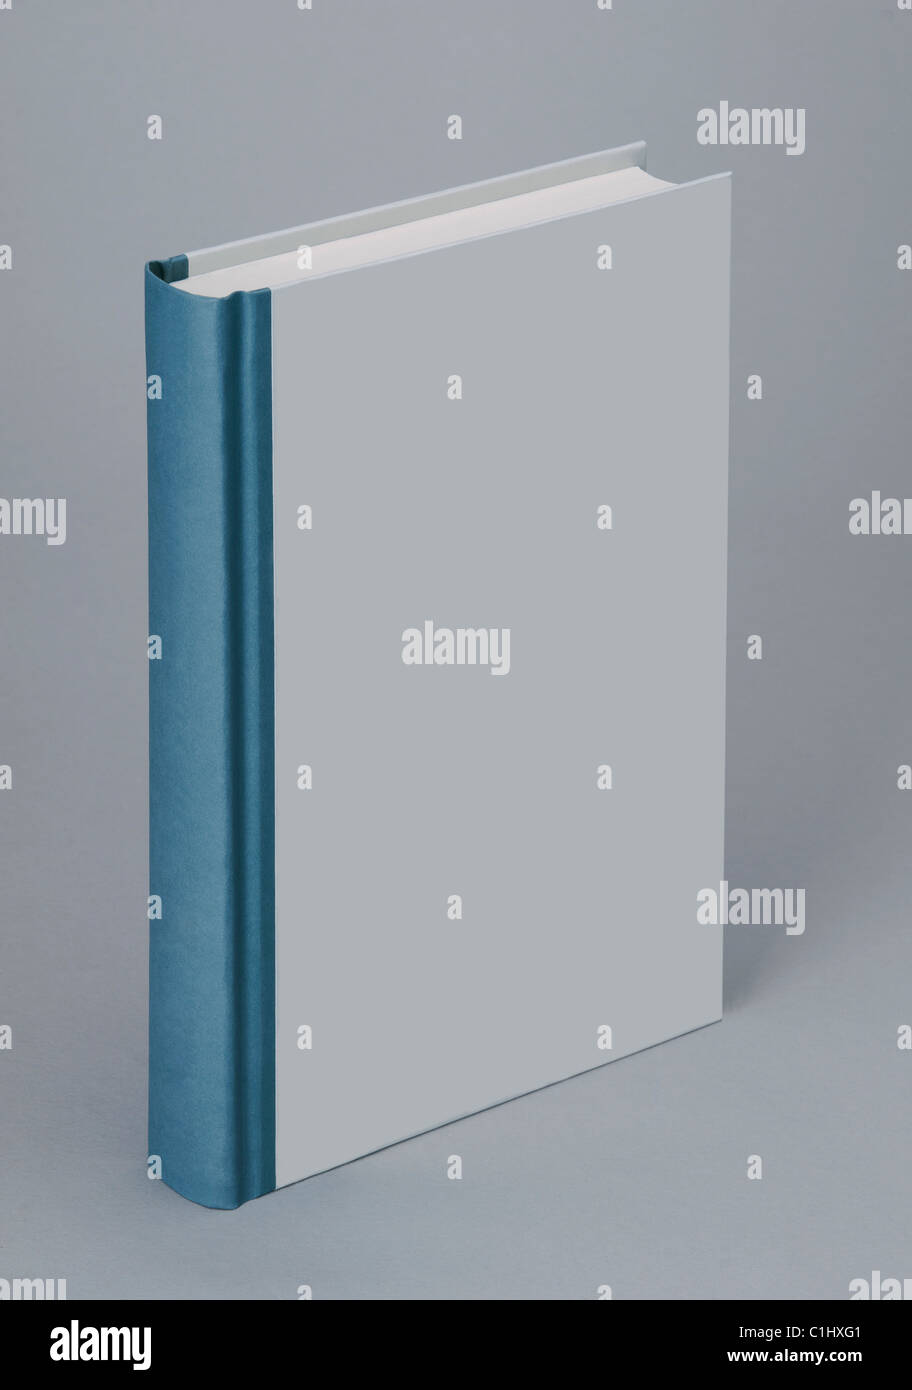 Plain standing book, for design layout Stock Photo